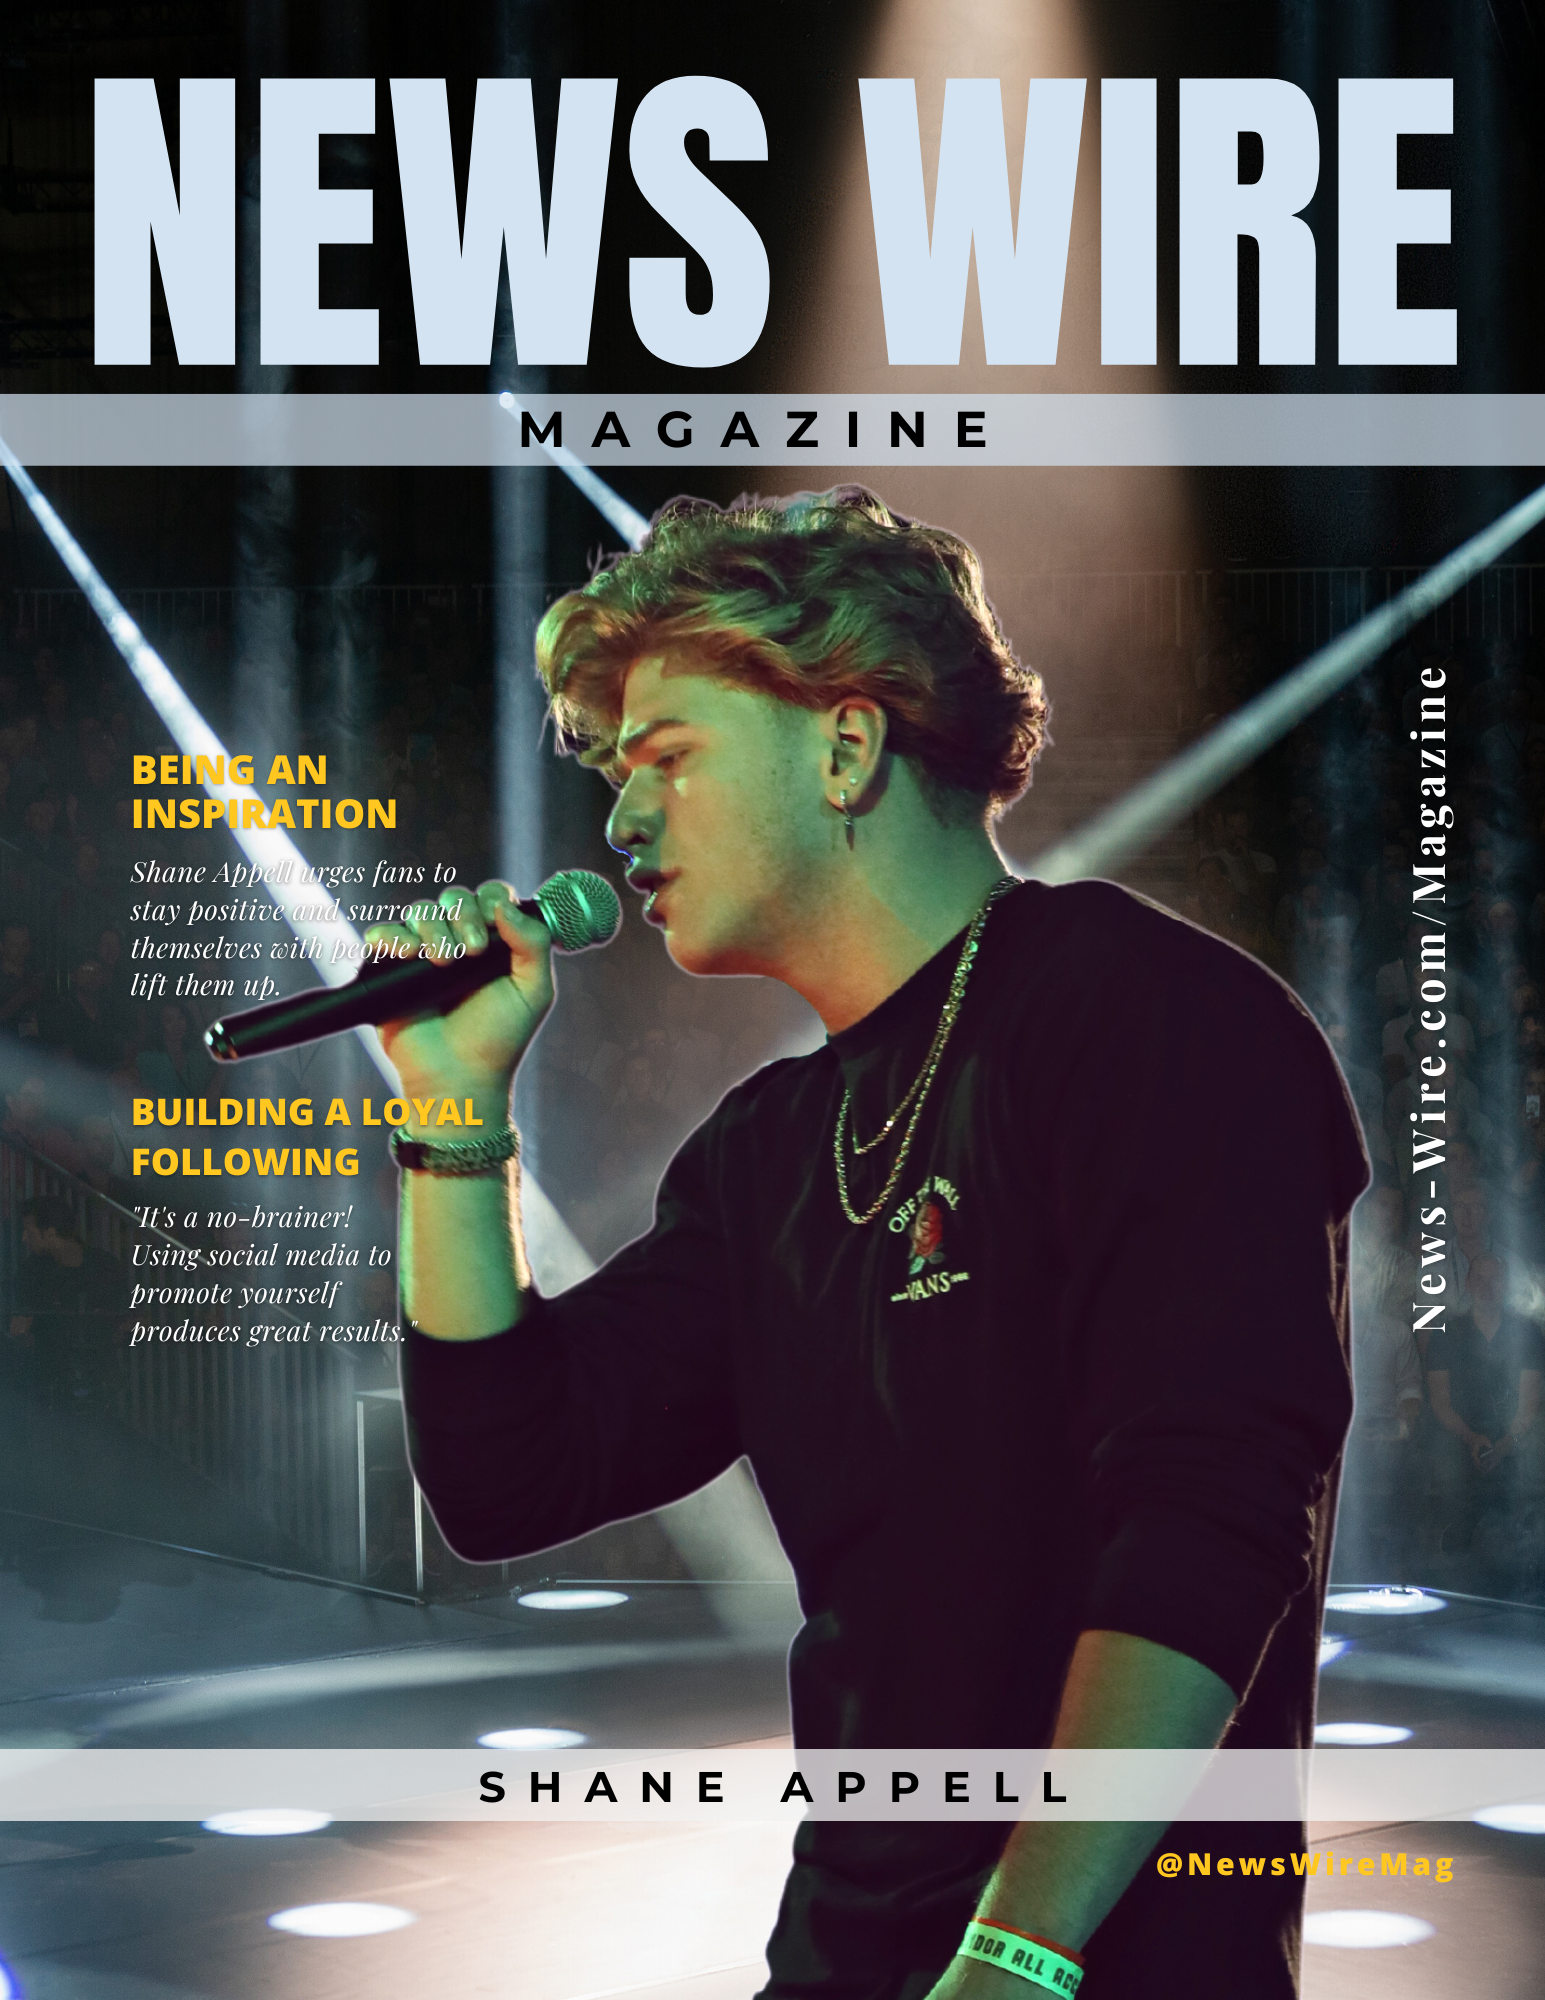 Shane Appell on the cover of News Wire Magazine